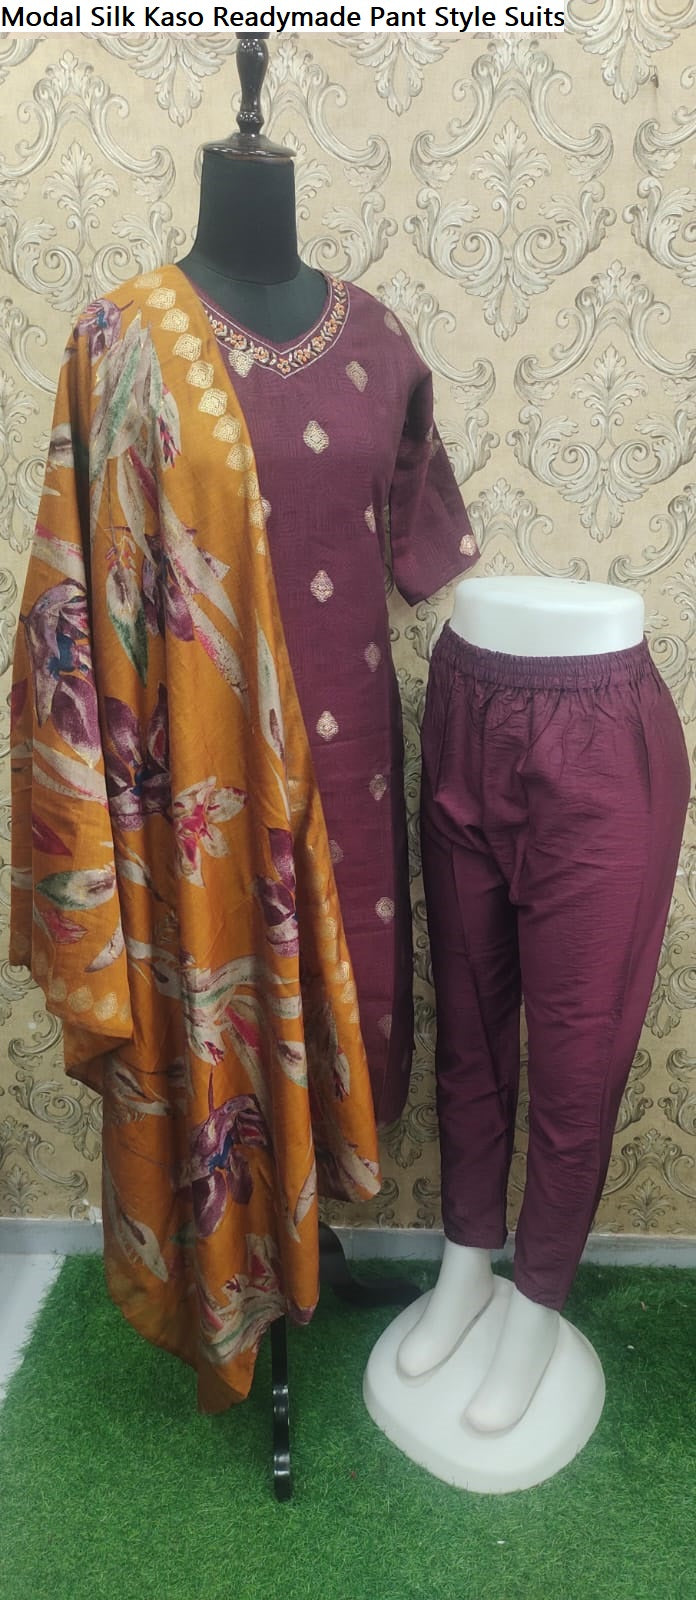 Modal Silk Kaso Readymade Pant Style Suits